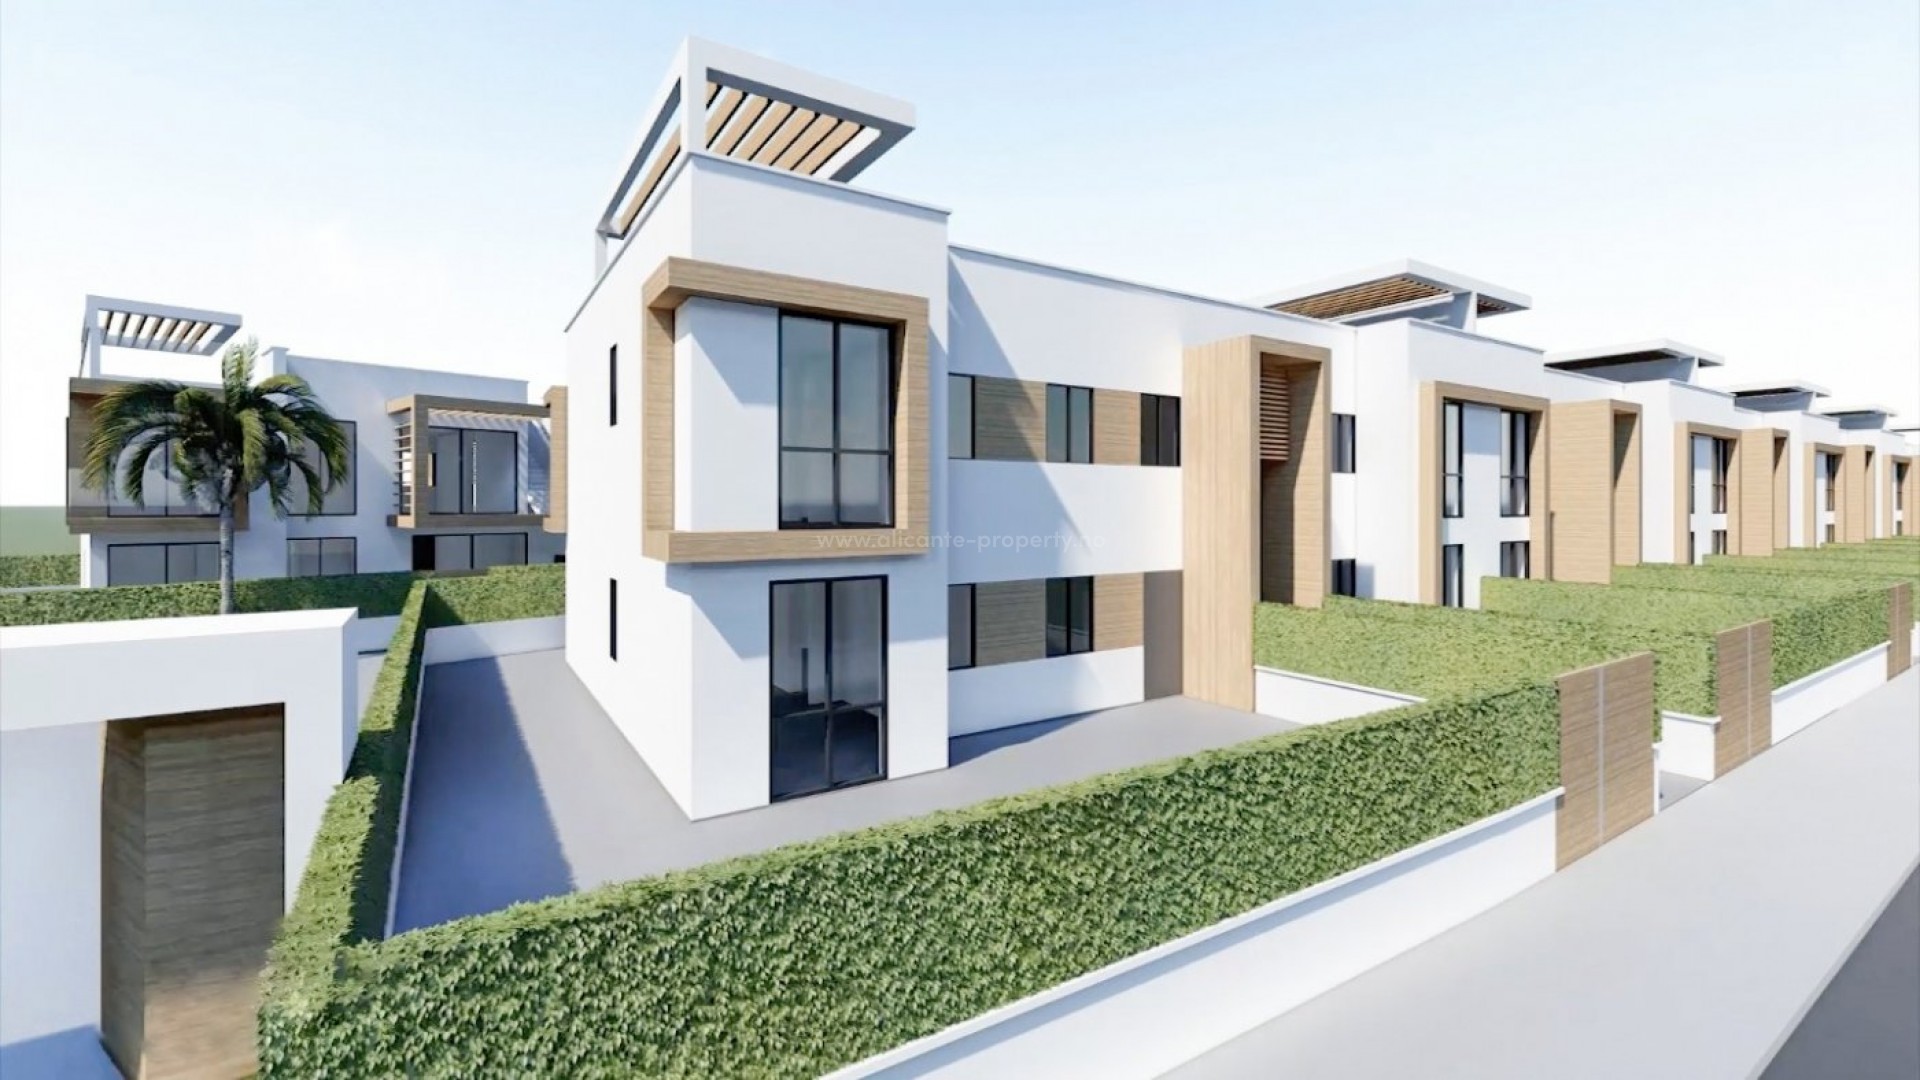 New built bungalows/townhouses in Orihuela Costa, 2 and 3 bedrooms, top floor with private solarium, private garden, shared pool. 5 min from Villamartin golf